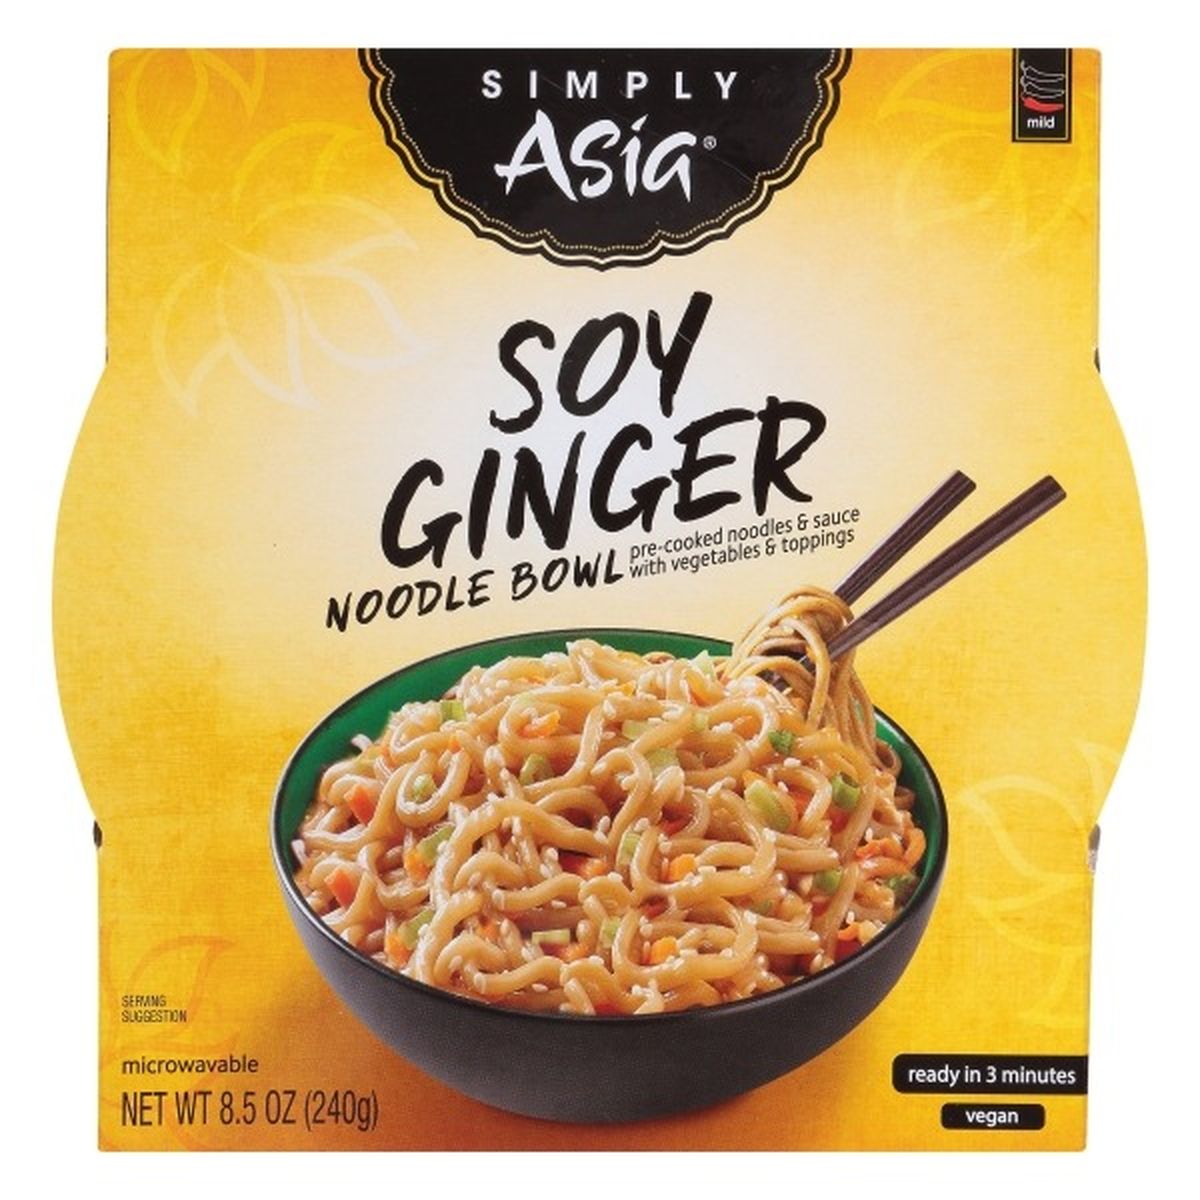 Calories in Simply Asias  Noodle Bowl, Soy Ginger, Mild